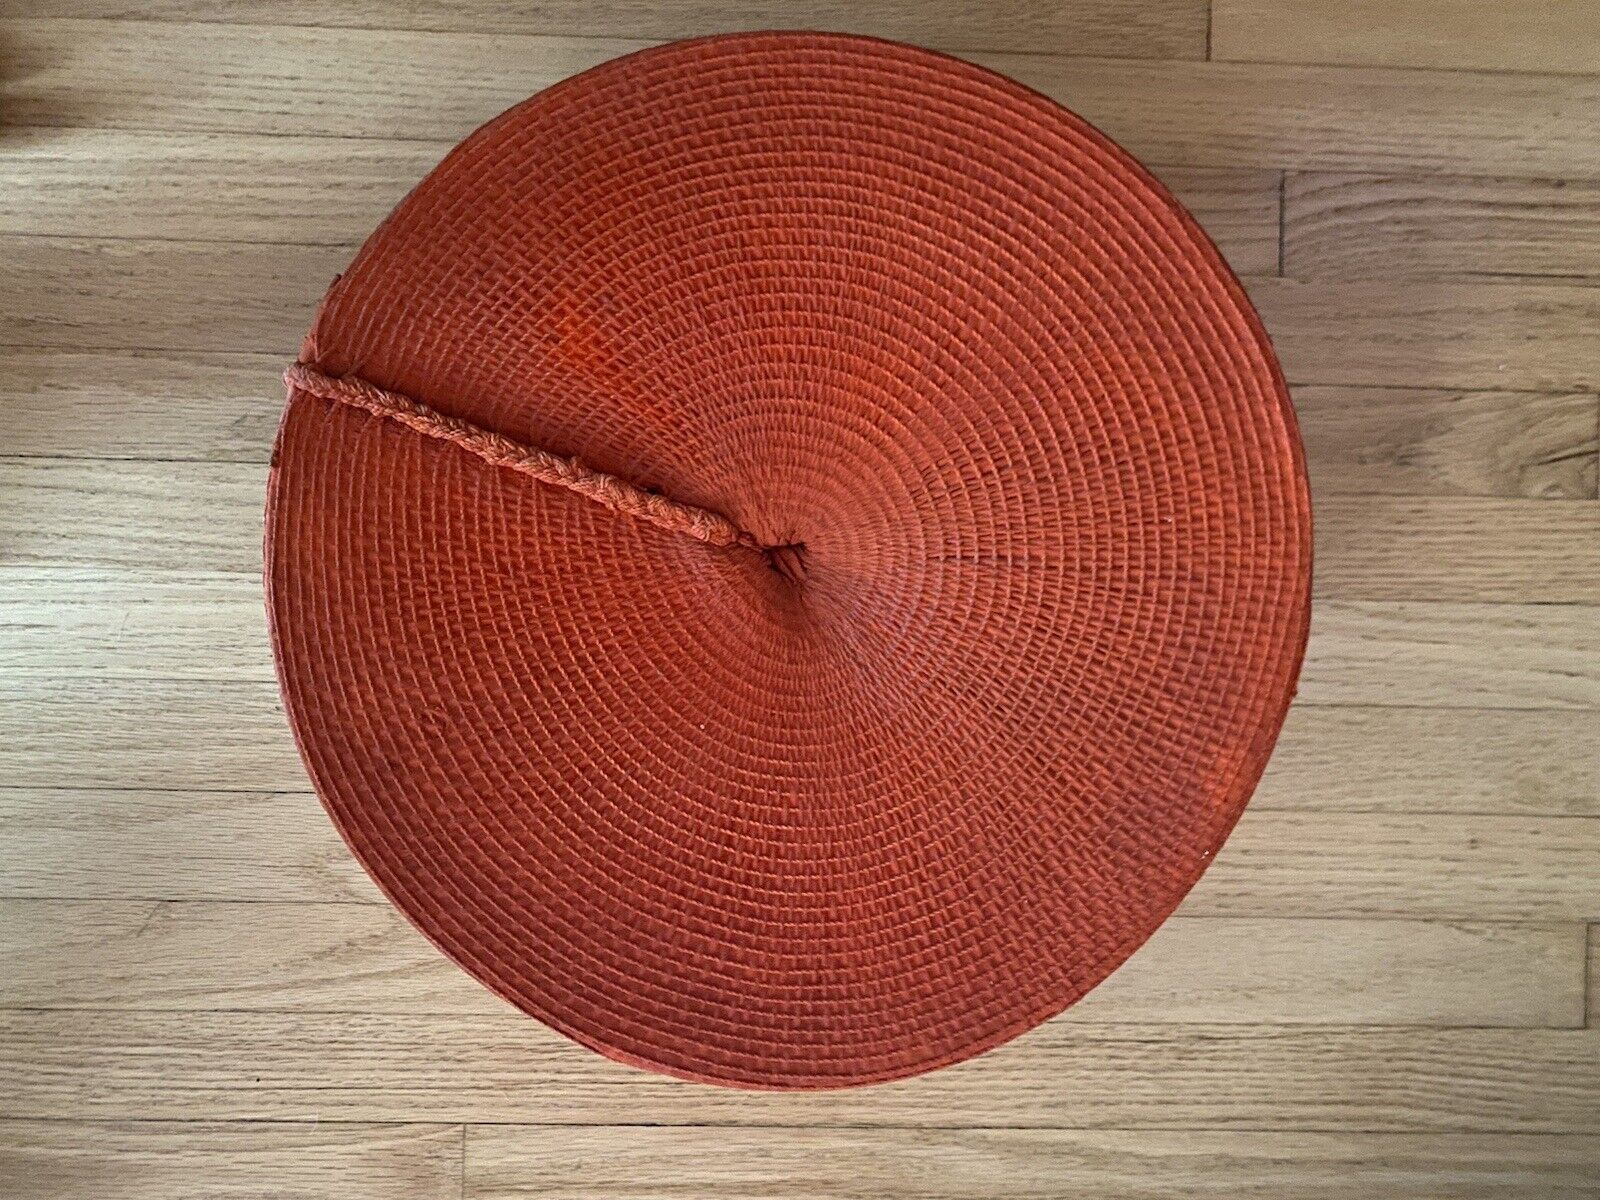 Antique Vintage Isicholo Zulu Hat, African Hat, Red Married Woman's Hat